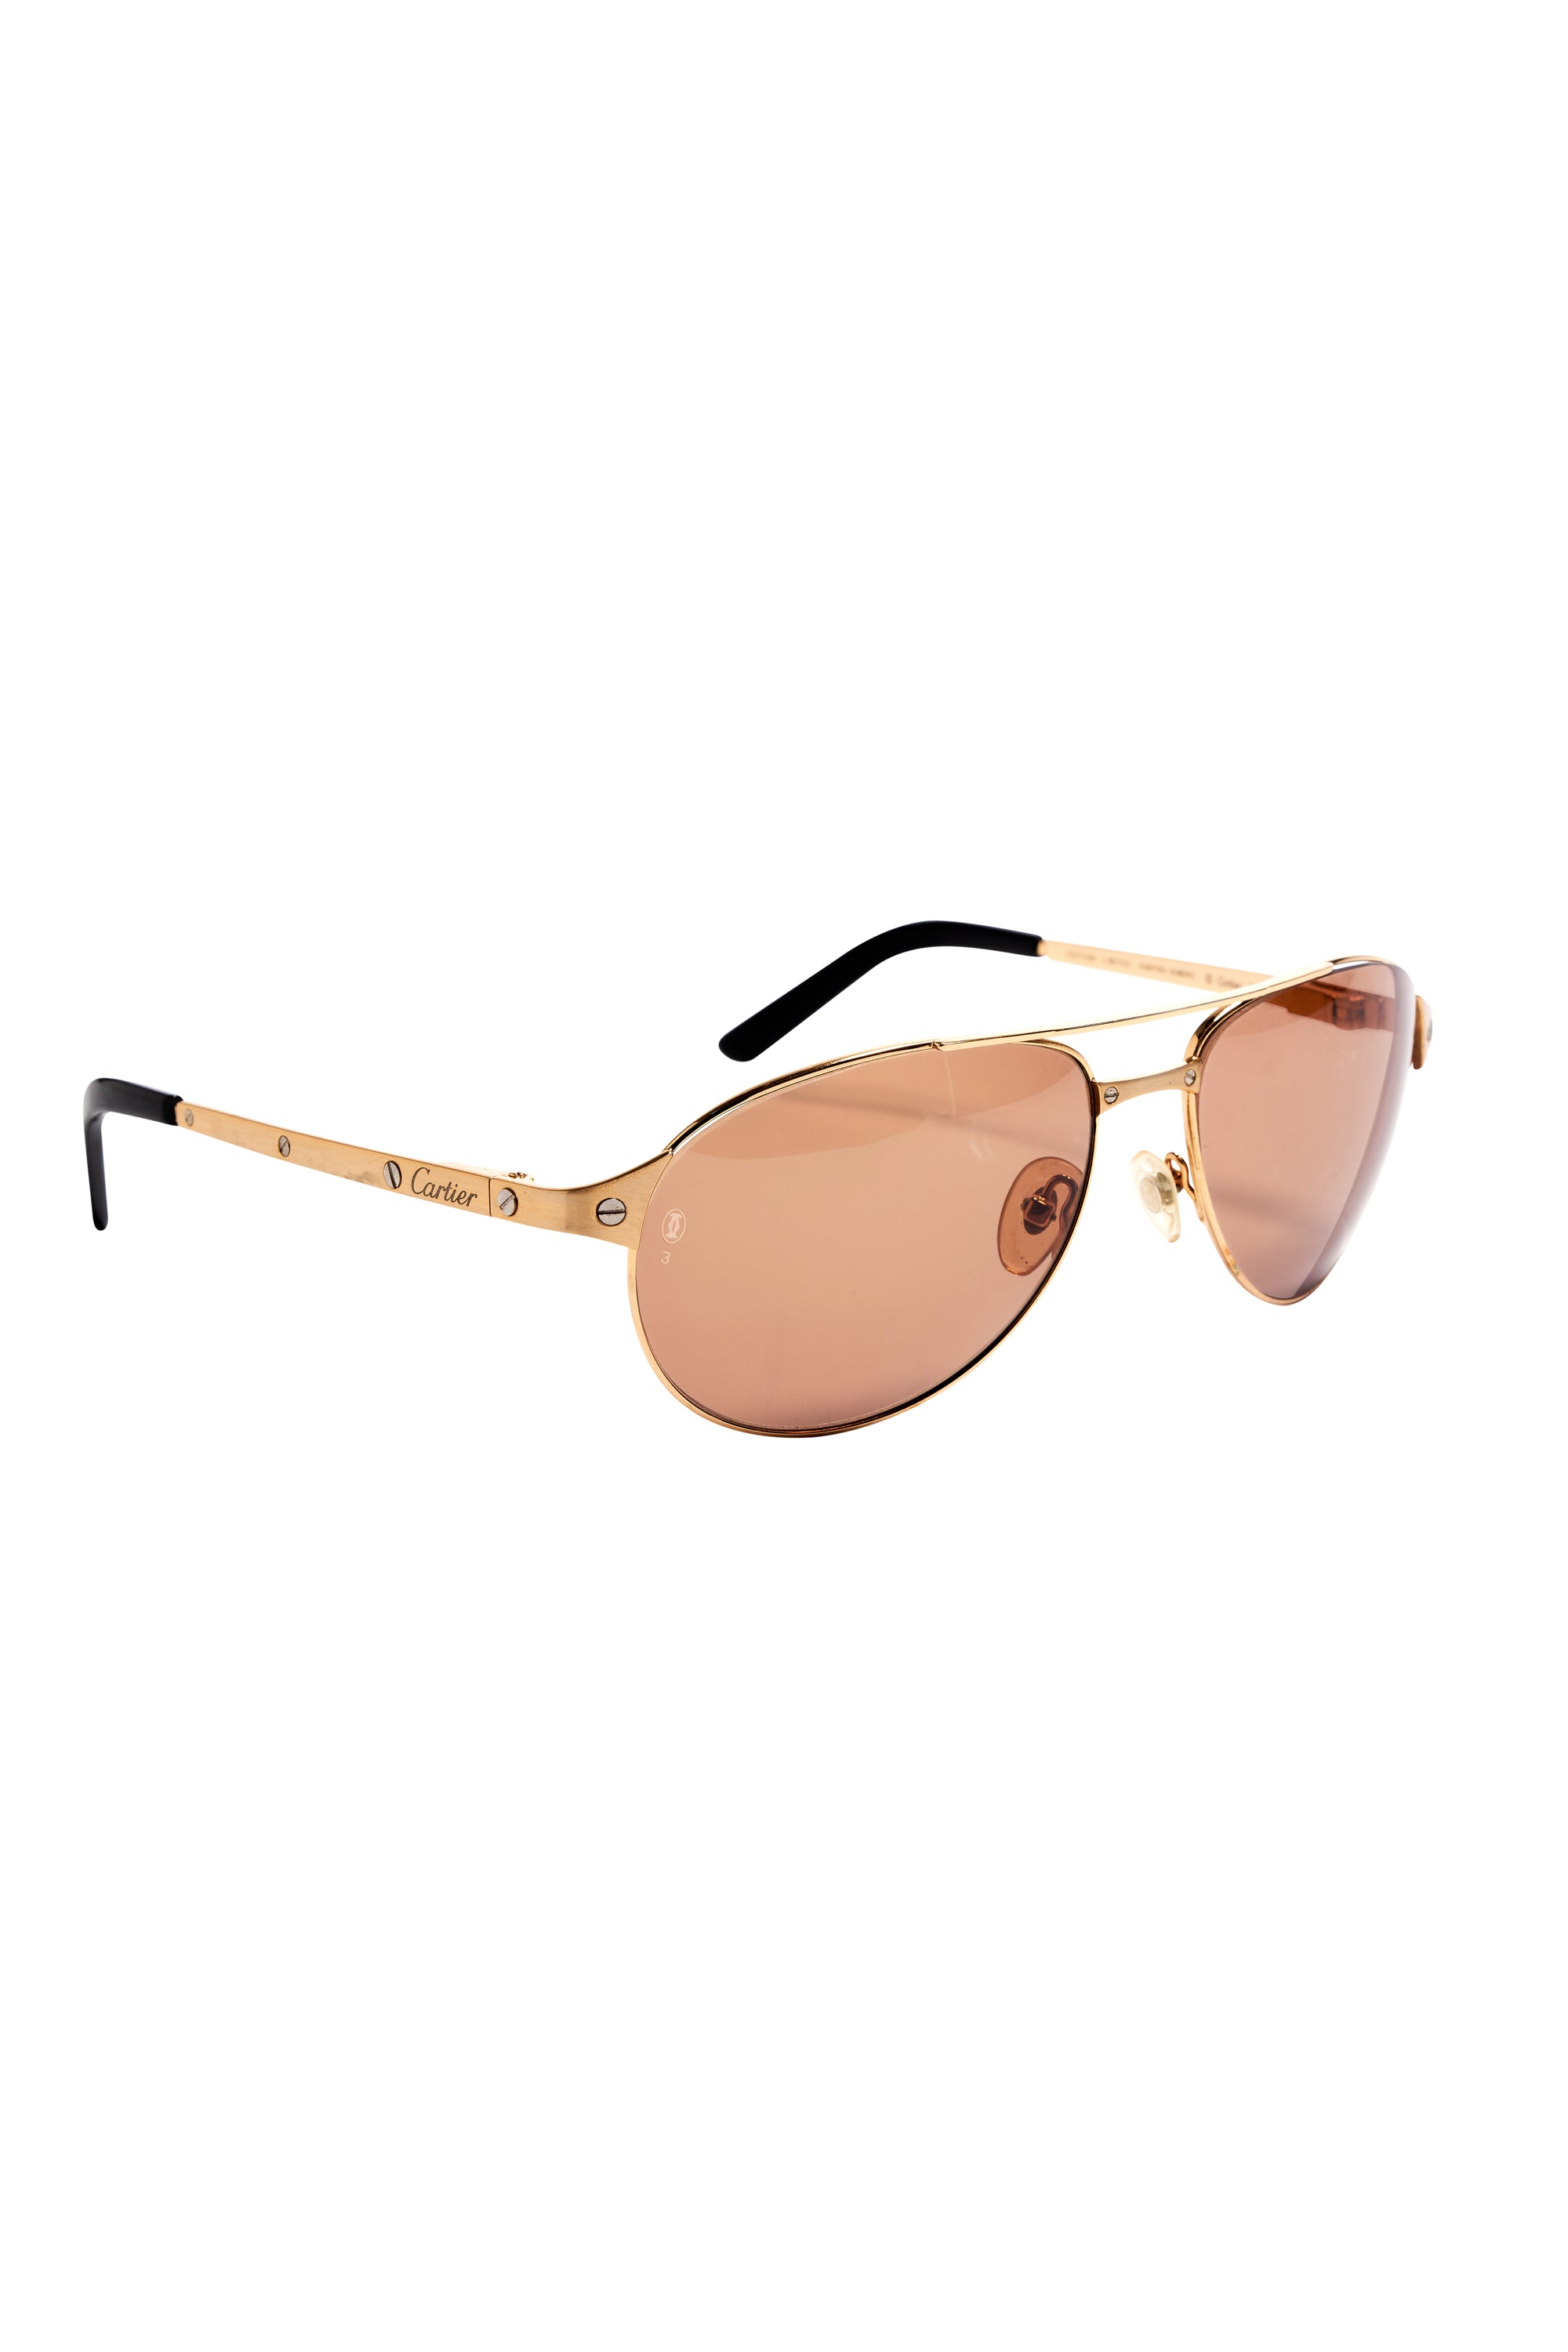 Cartier 1970s Santos Limited Edition 18k Gold Plated Sunglasses